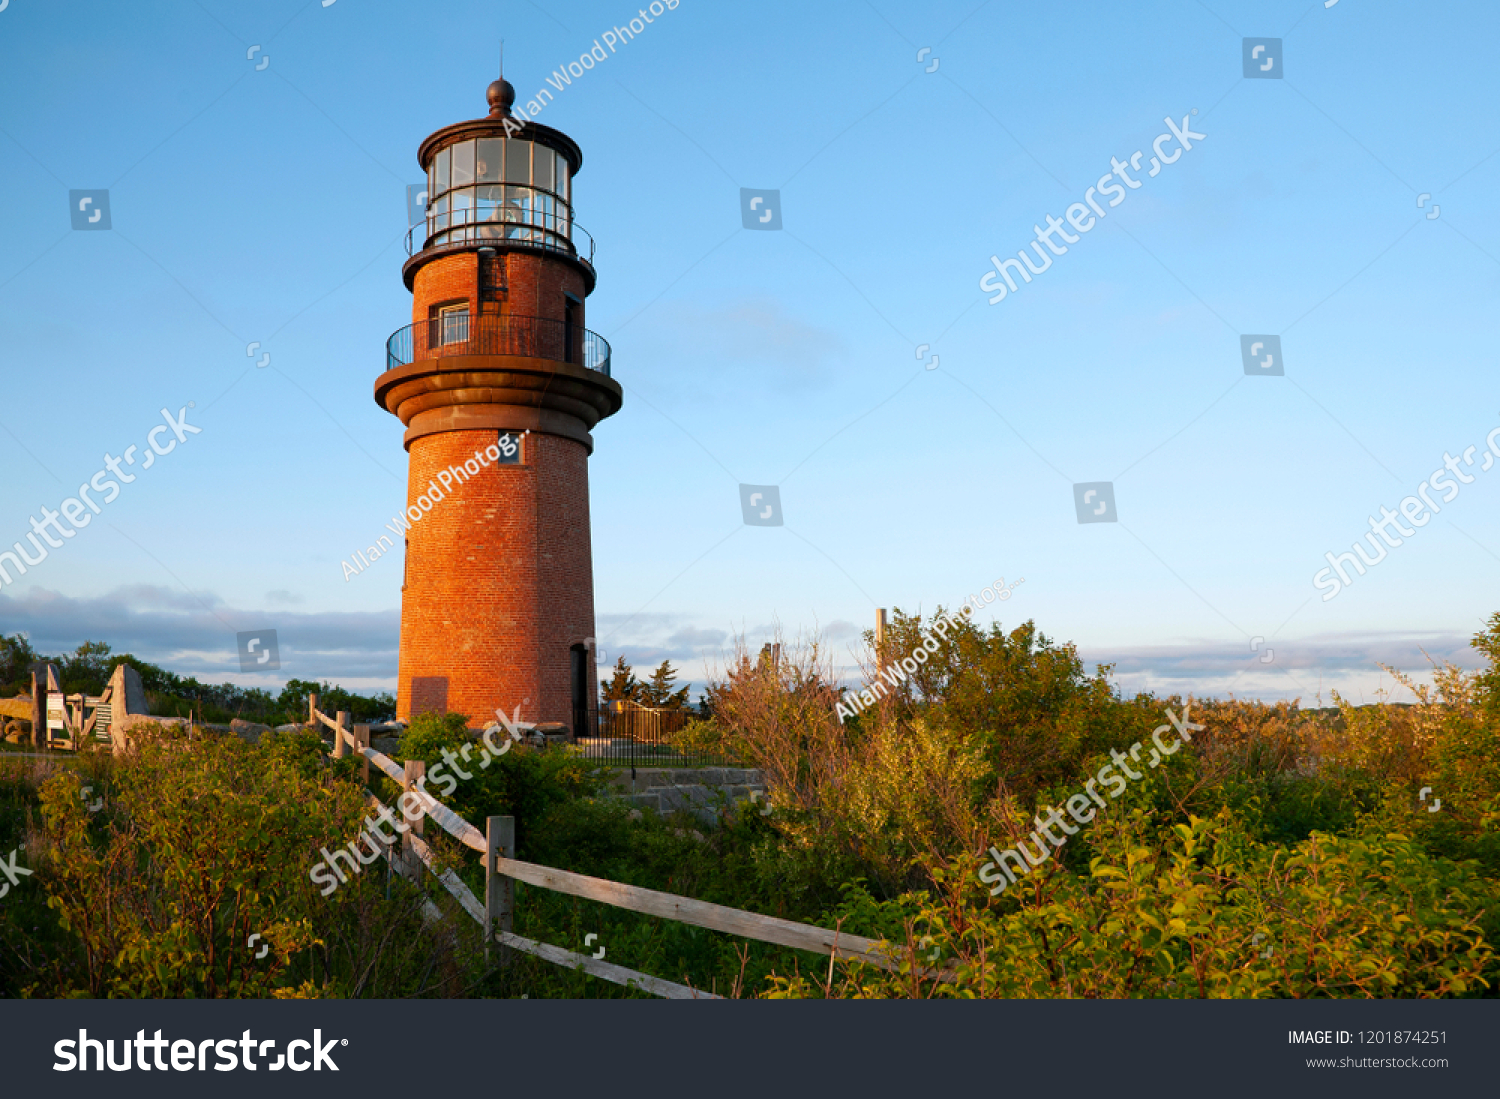 Wooden fence leads to the large brick tower of Aquinnah lighthouse, also referred to as Gay Head light, on a late summer day on Martha’s Vineyard island in Massachusetts. #1201874251